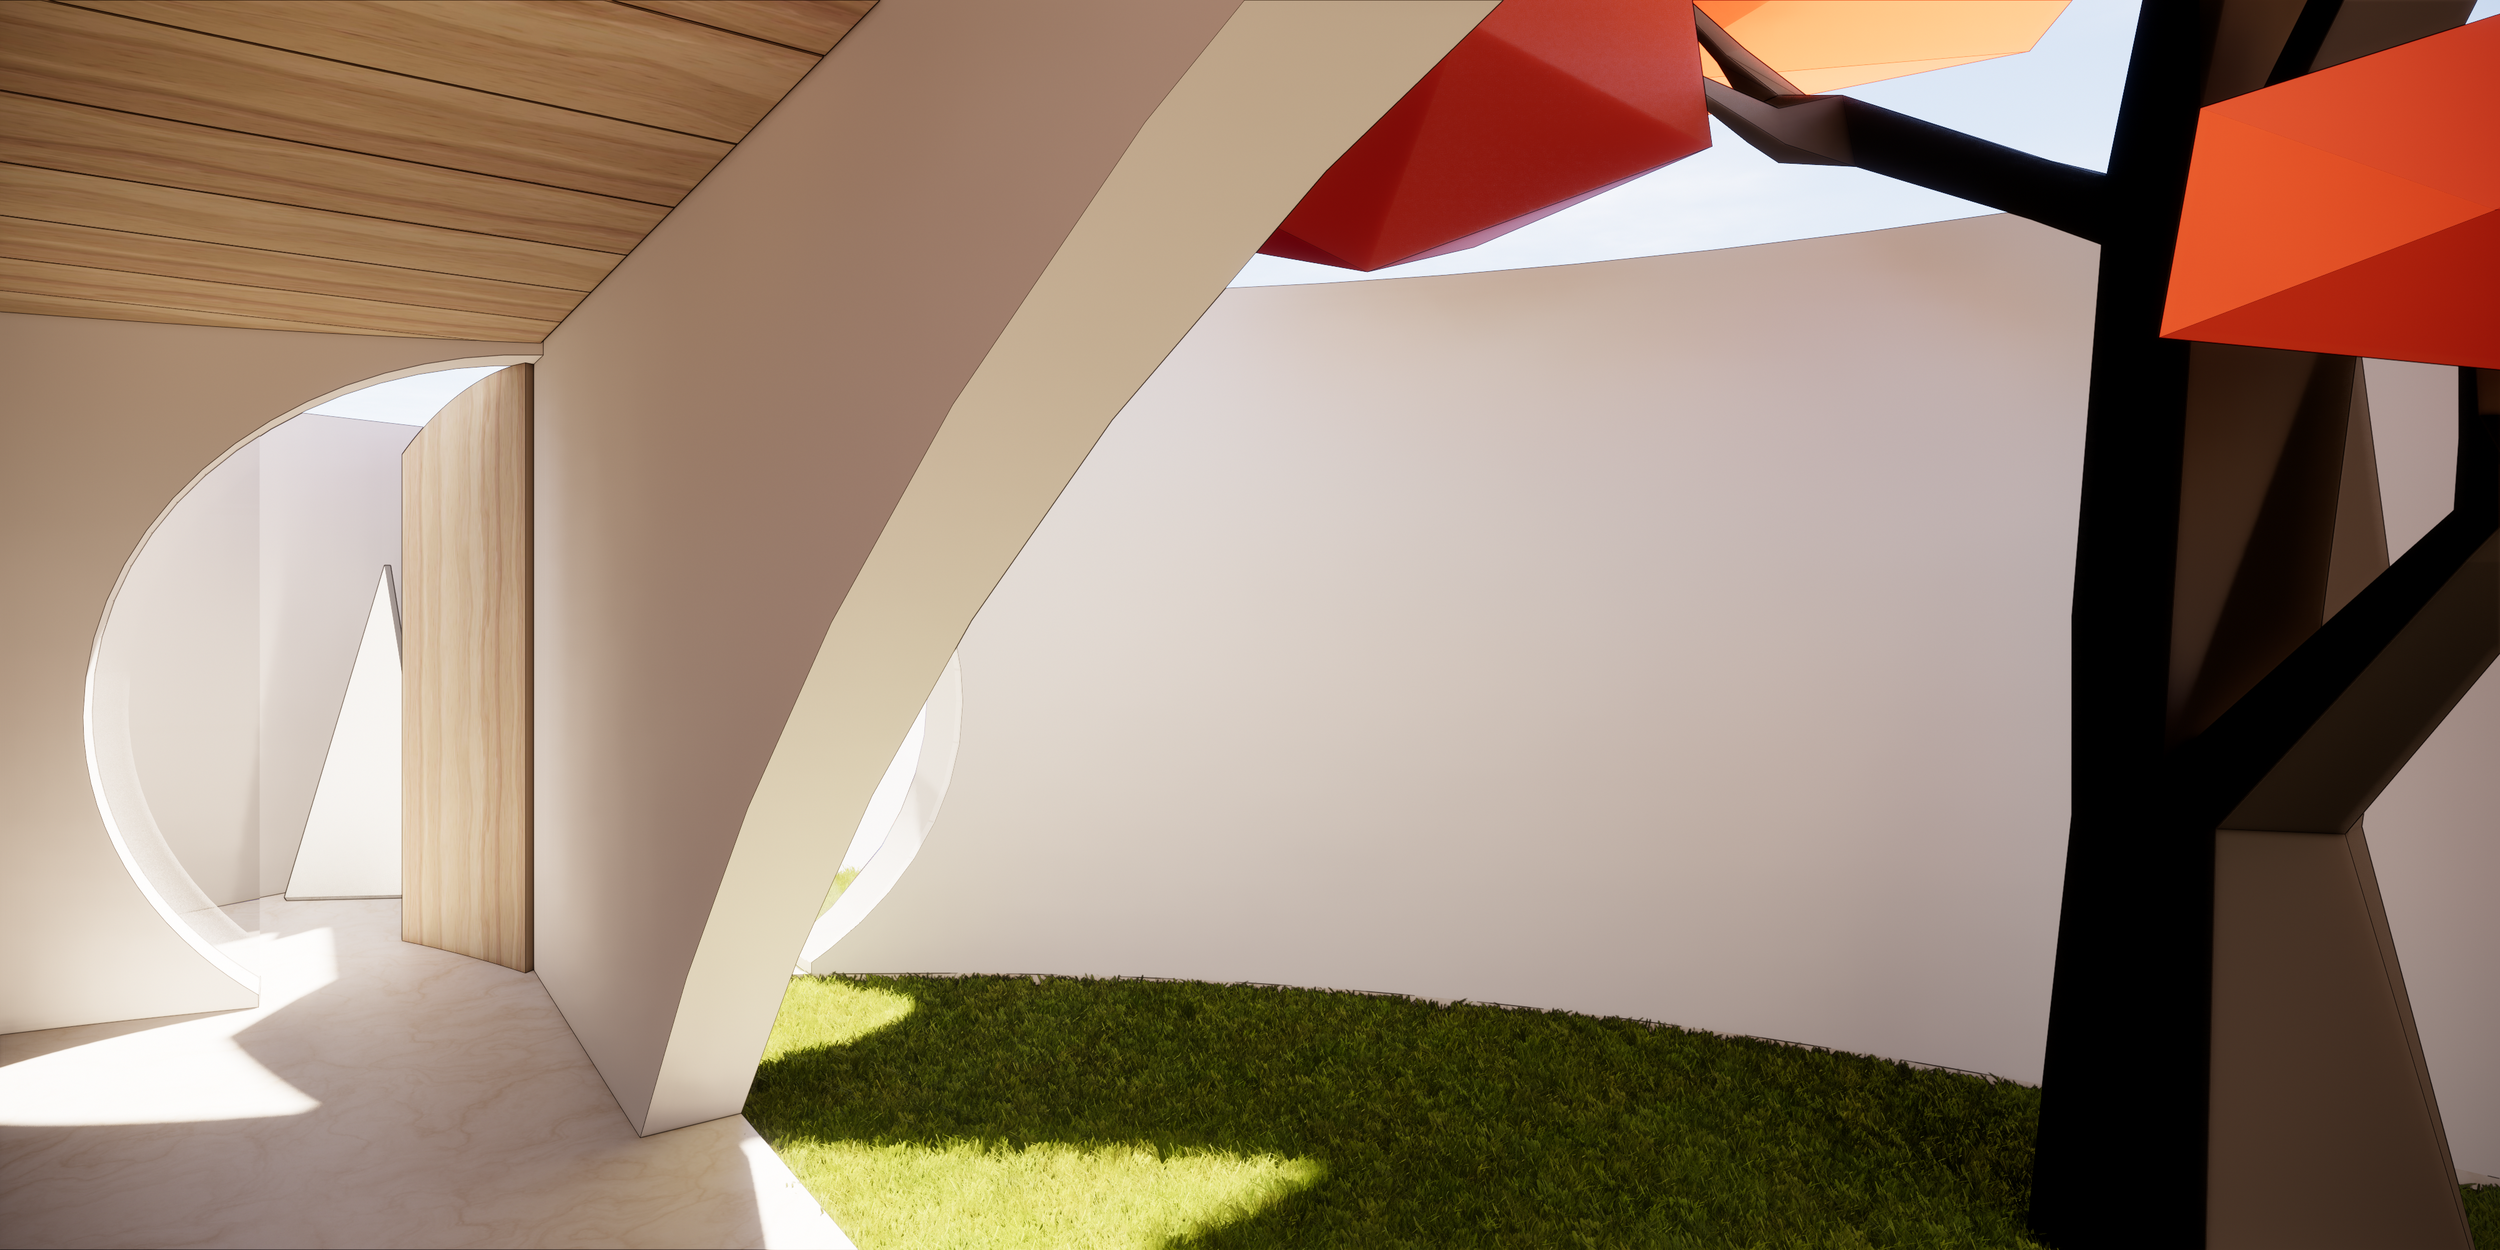 Low-Poly Pavilion from Archway